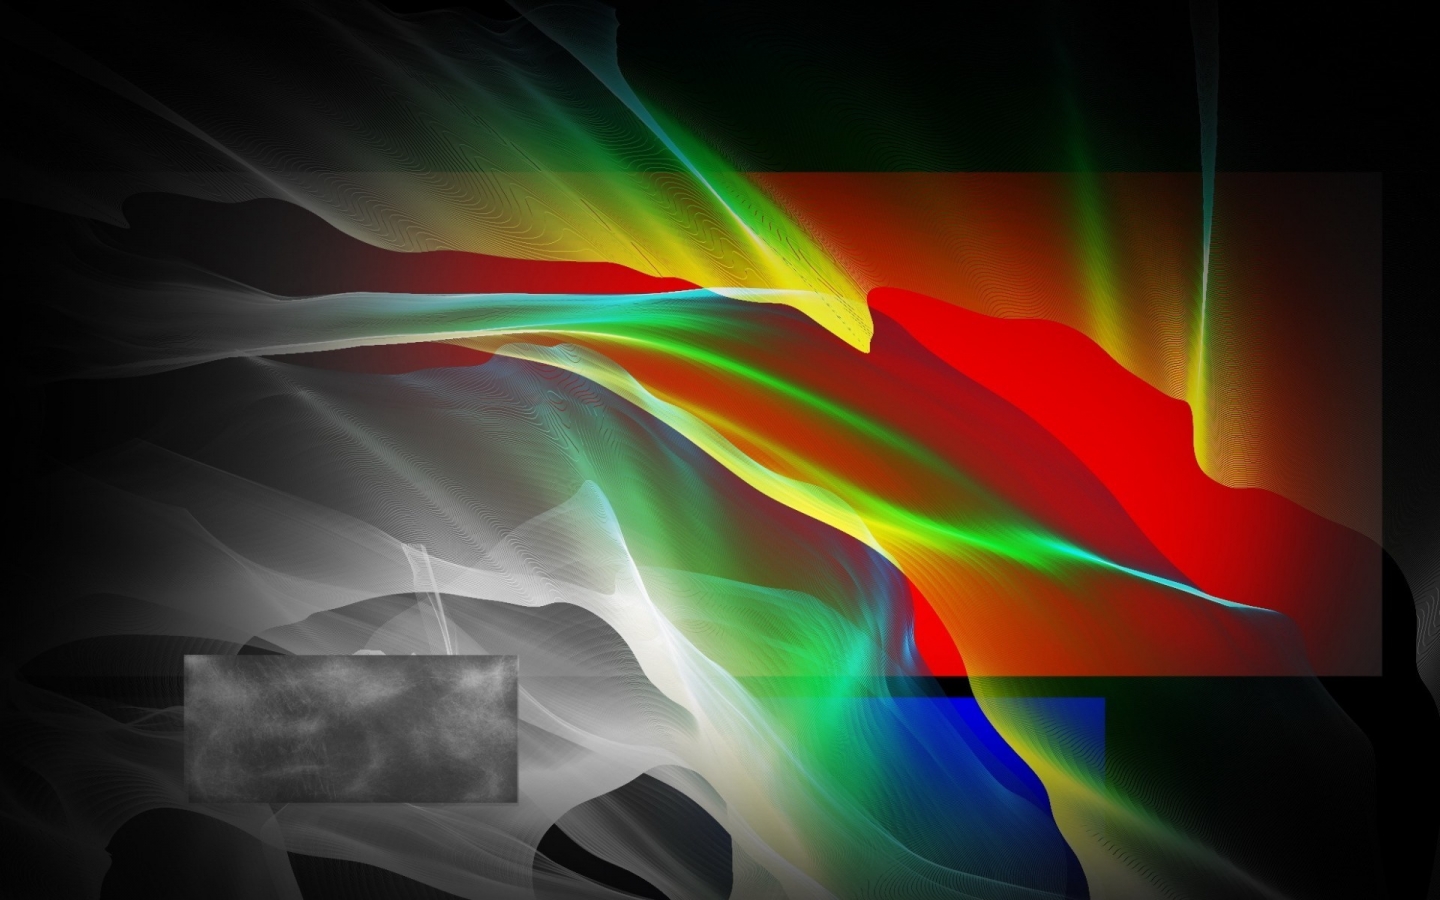 Abstract Shapes for 1440 x 900 widescreen resolution